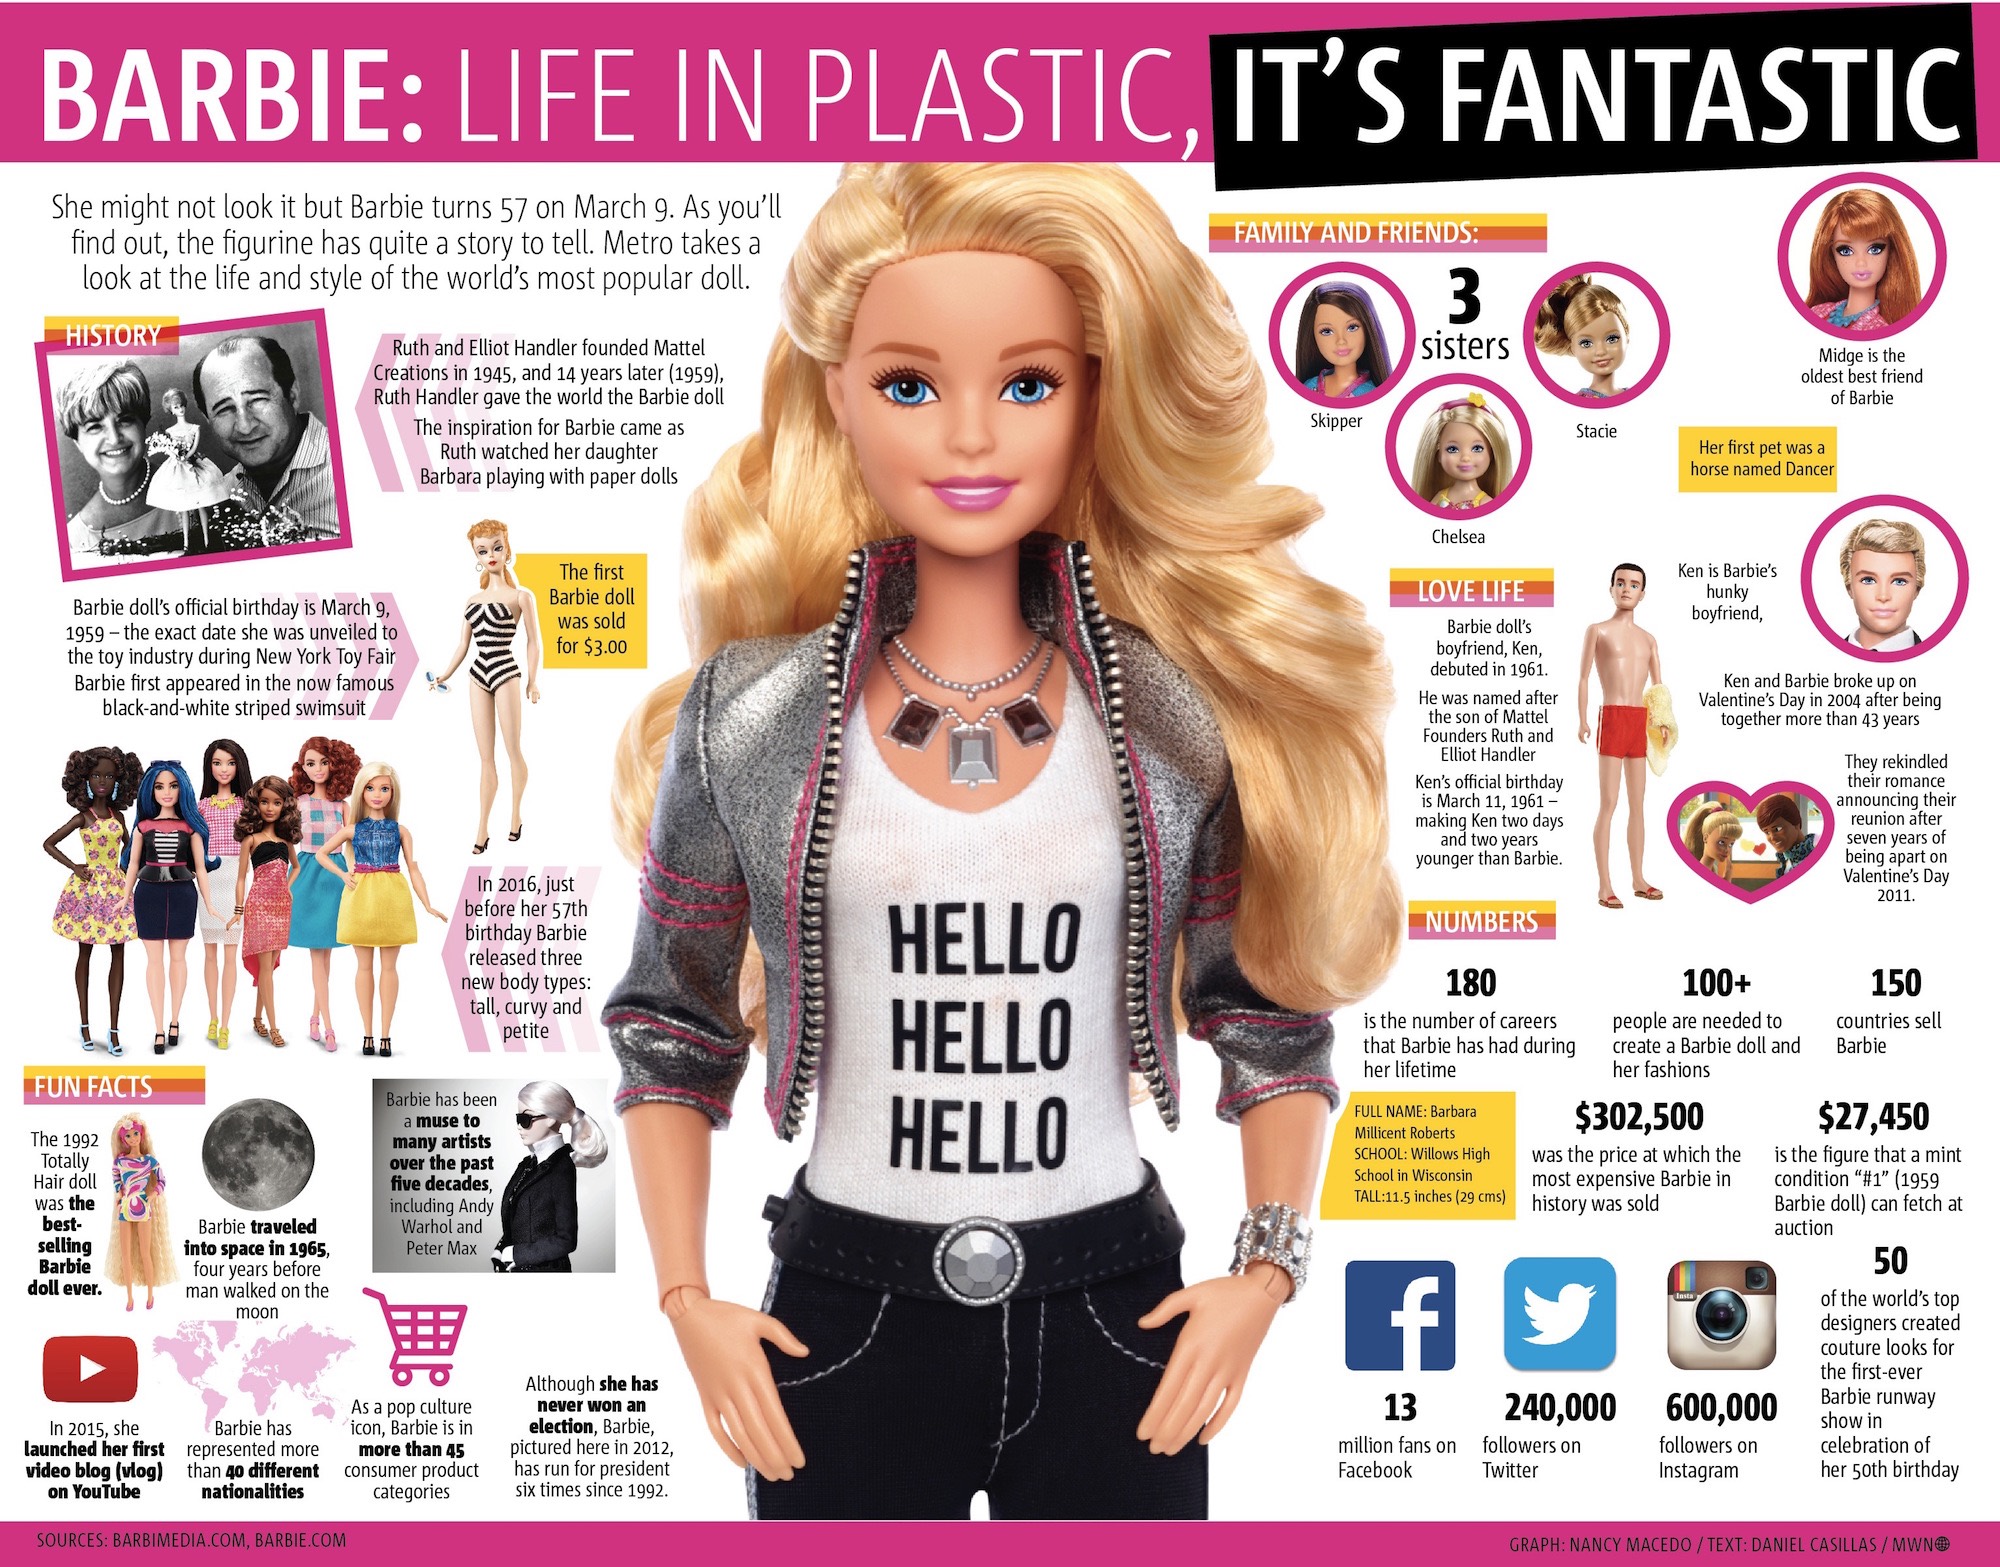 Barbie Facts And Figures